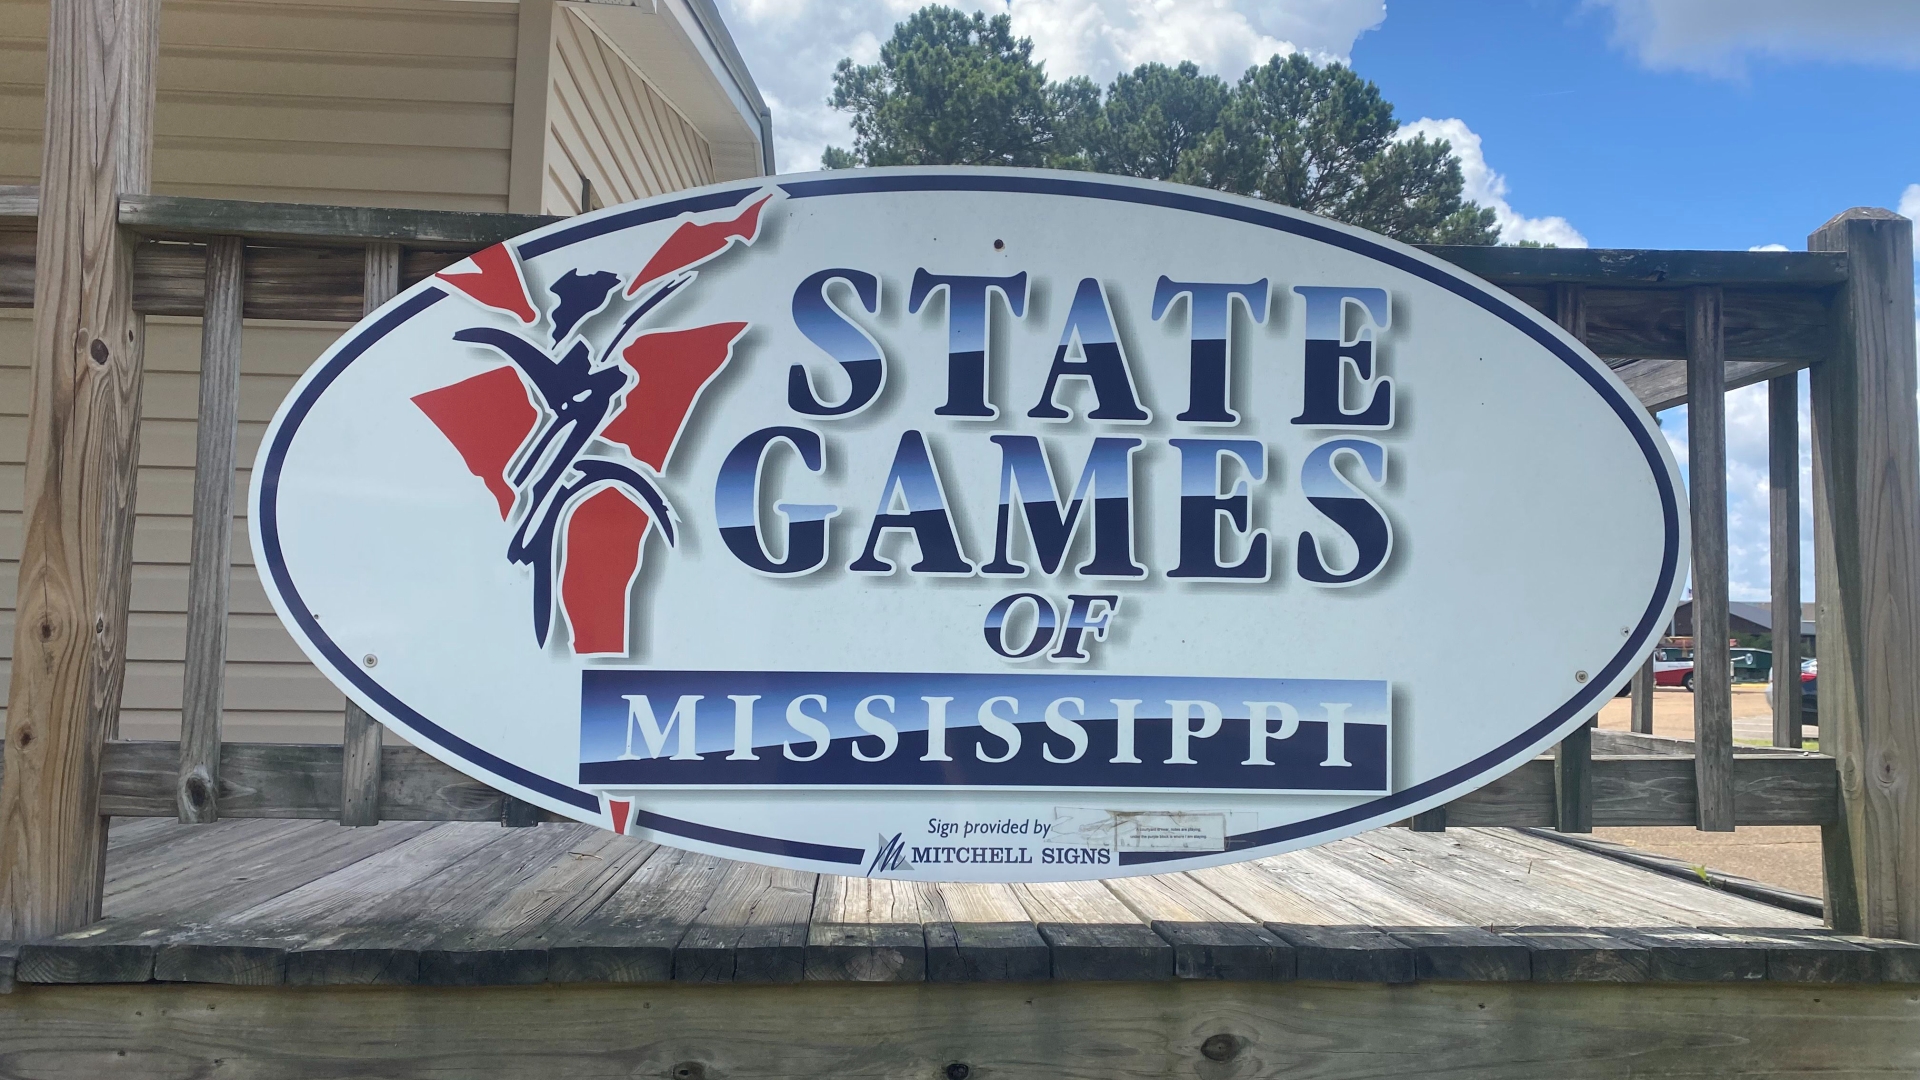 bethany davids recommends skip the games ms pic